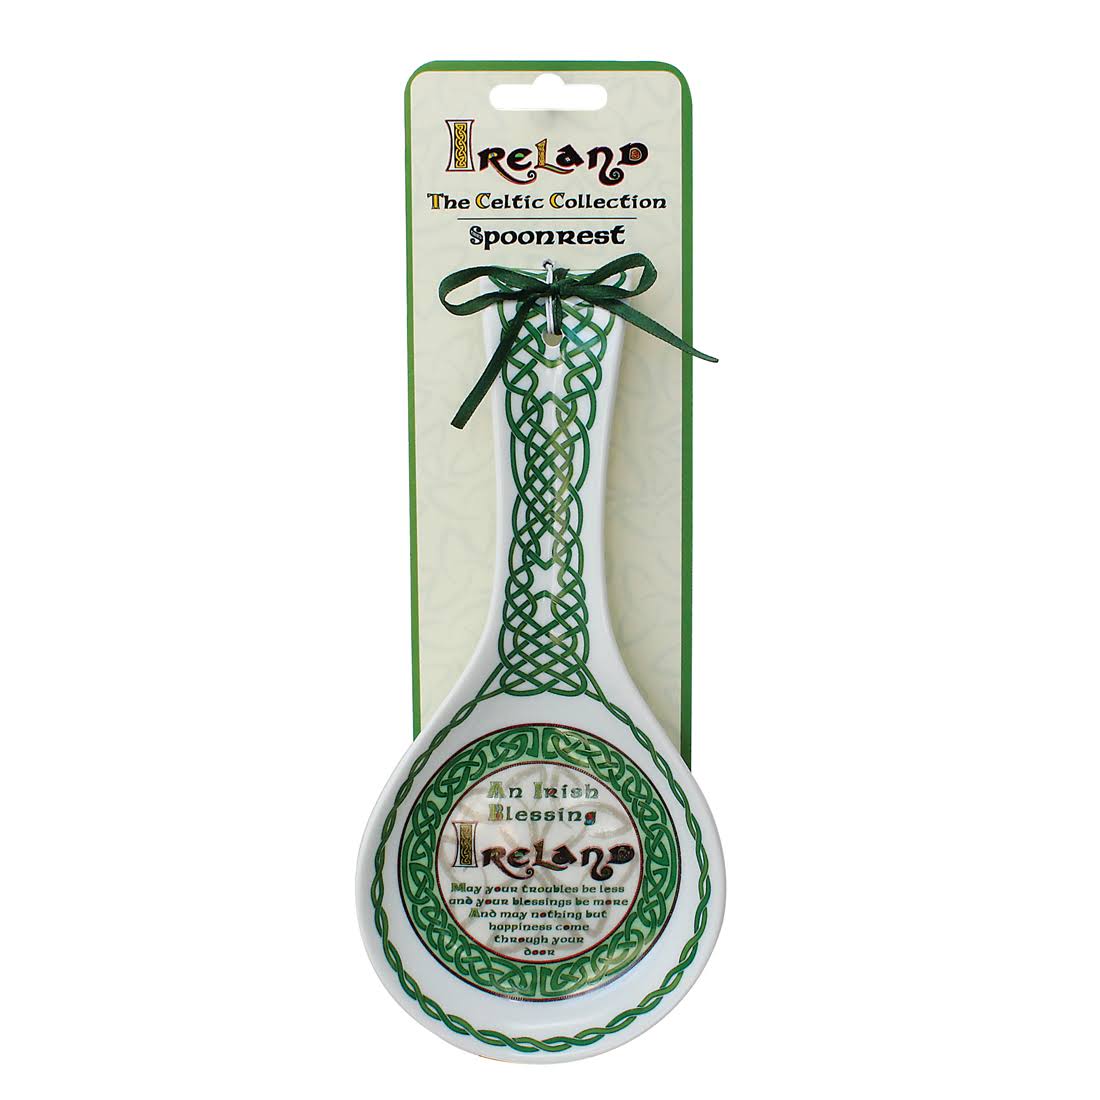 Black Sheep Collectable Spoon with Shamrocks and Ireland Text 